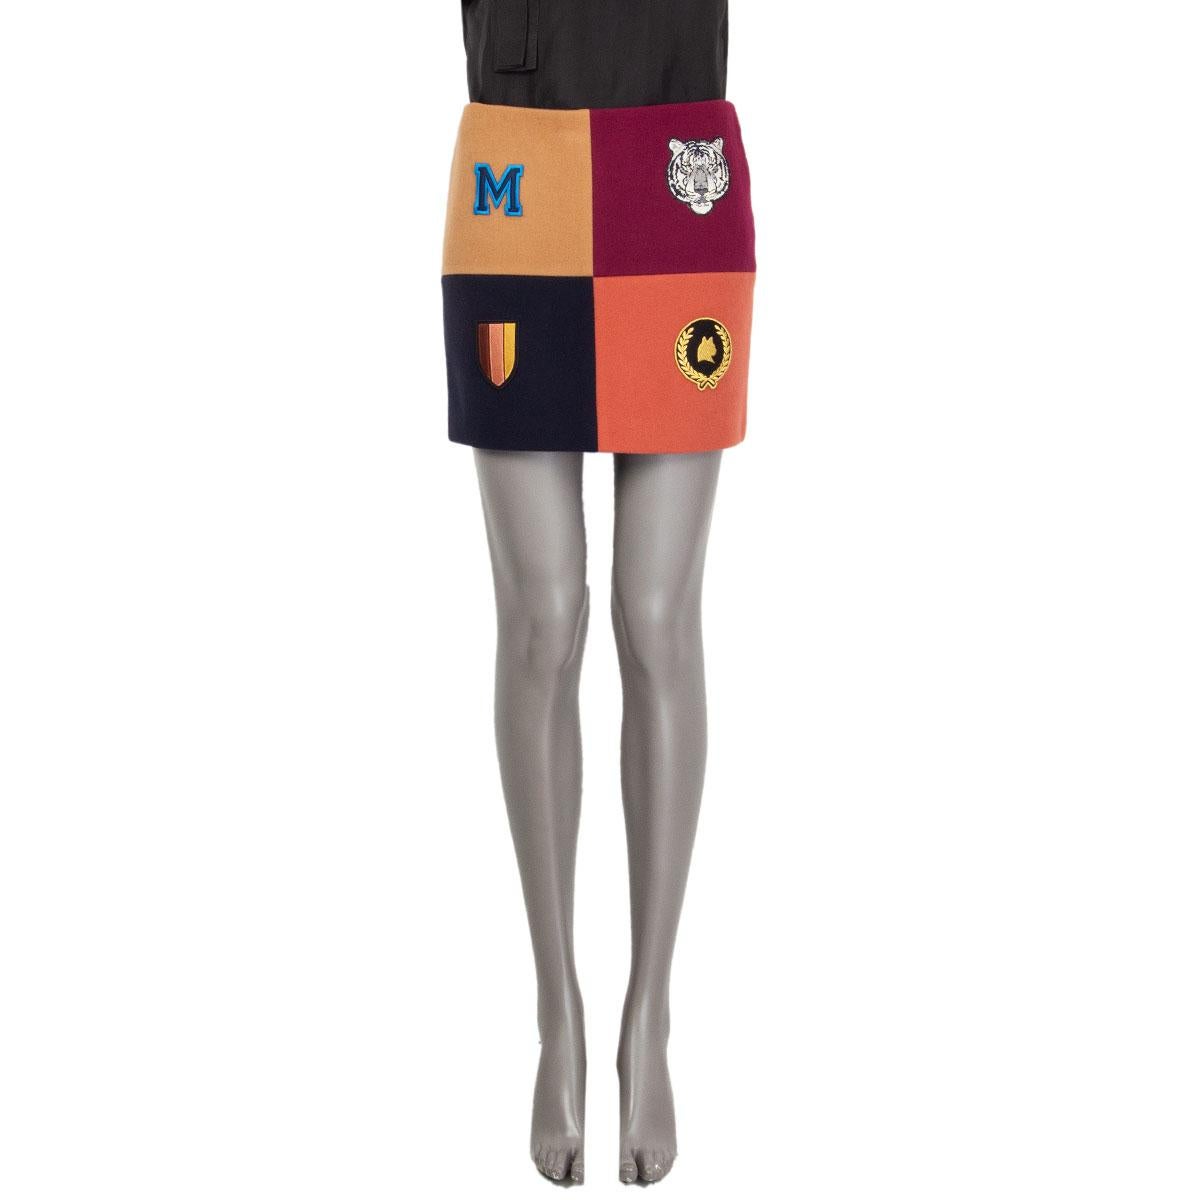 authentic Stella McCartney 'Moana' mini skirt in midnight blue, mauve, beige and magenta wool (75%), polyamide (25%) and lined in black viscose (52%) and cotton (48%). Has four stitched on patches on the front. Opens with a zipper on the back. Has